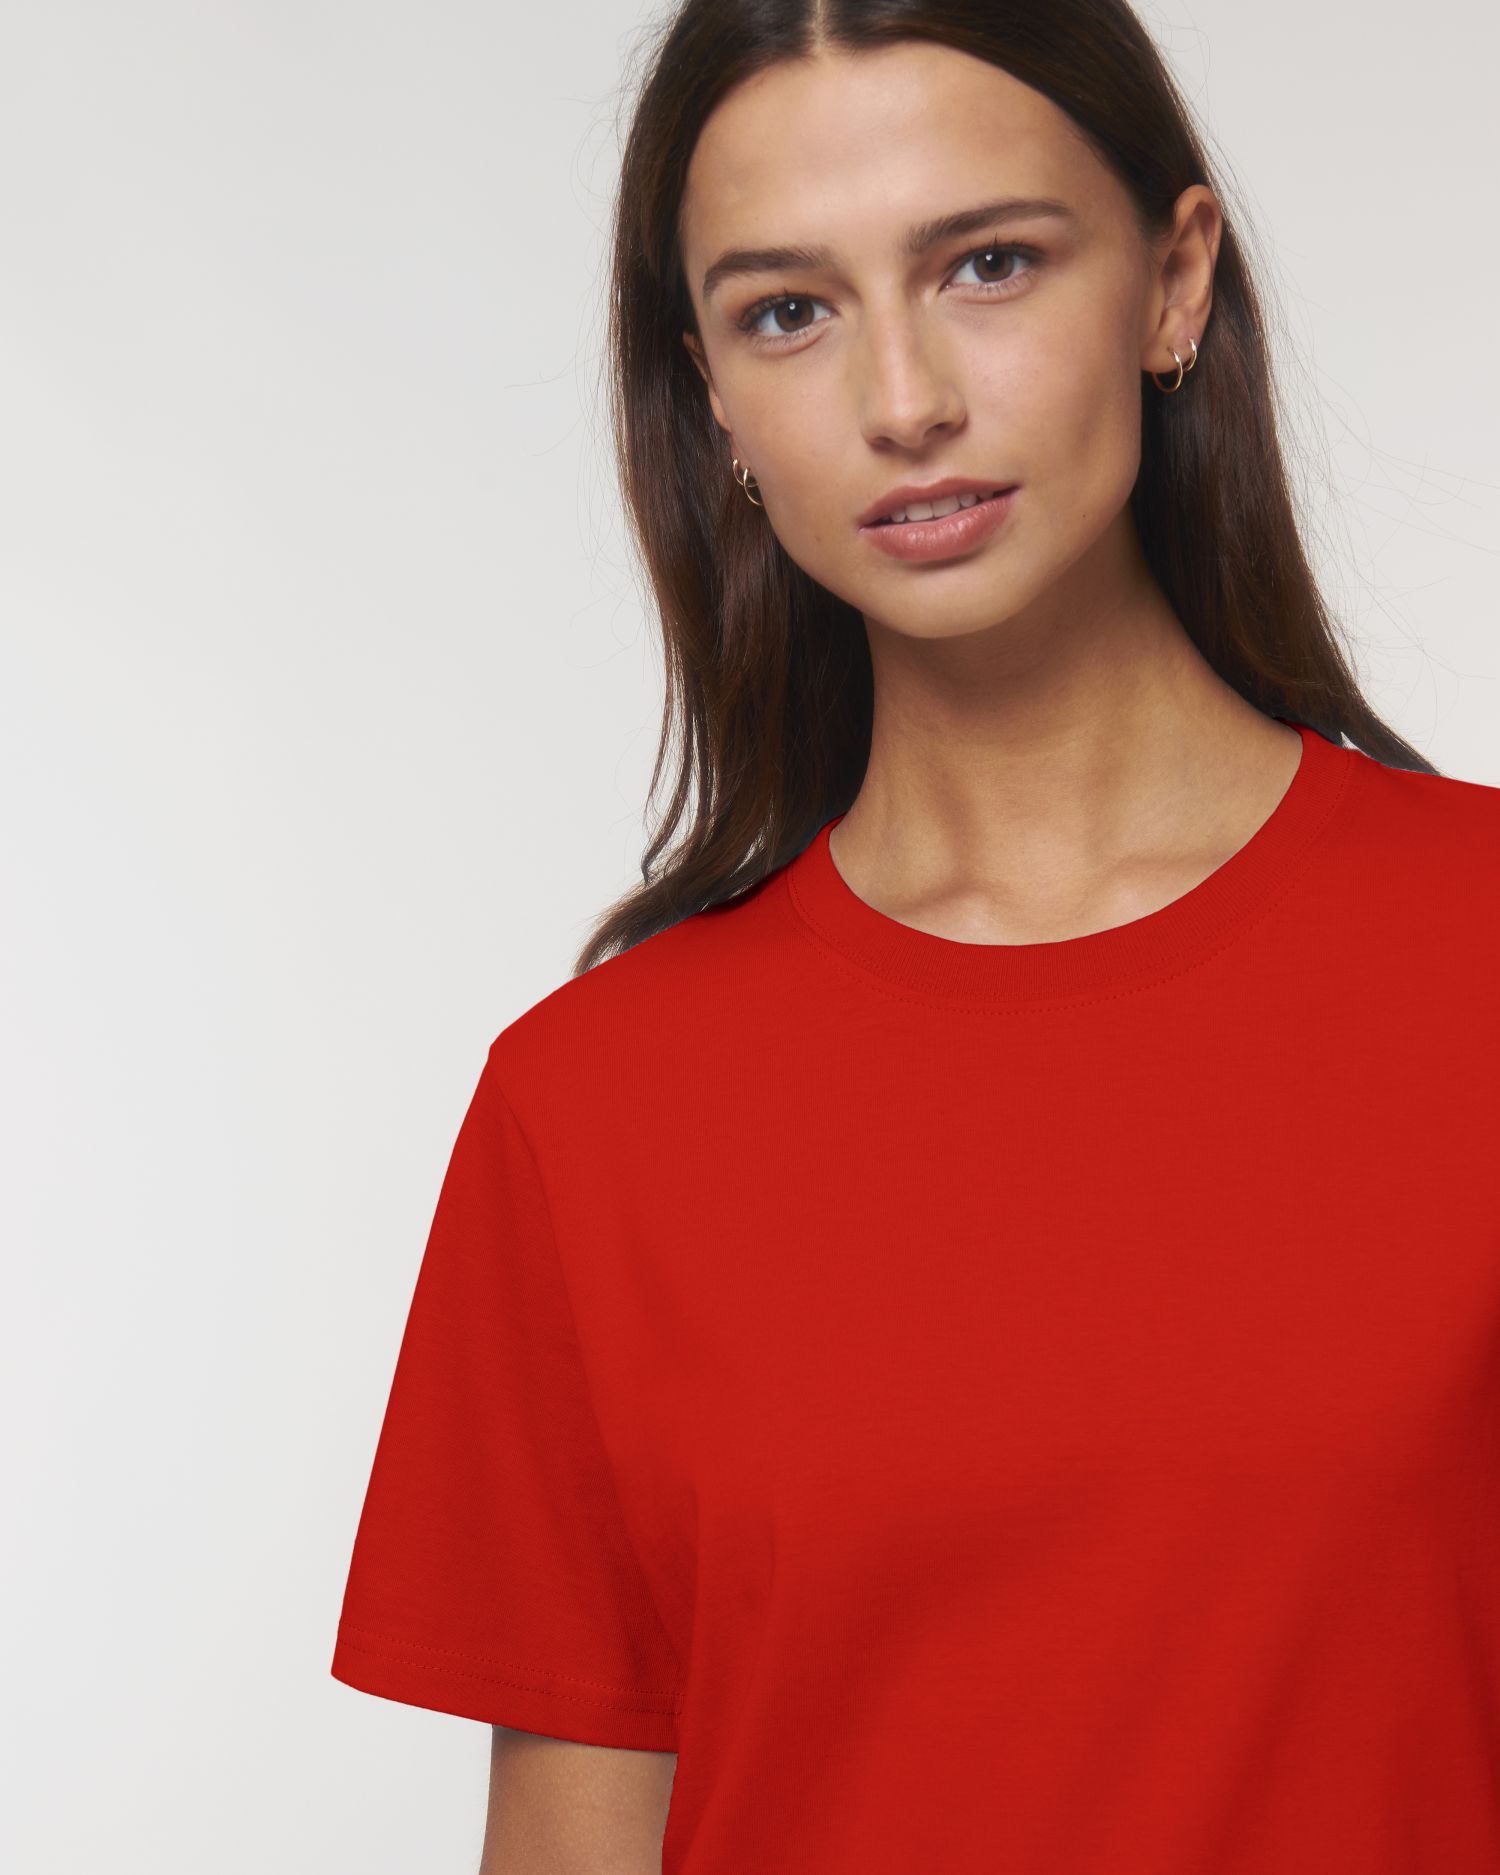 T-Shirt Stanley Sparker in Farbe Bright Red